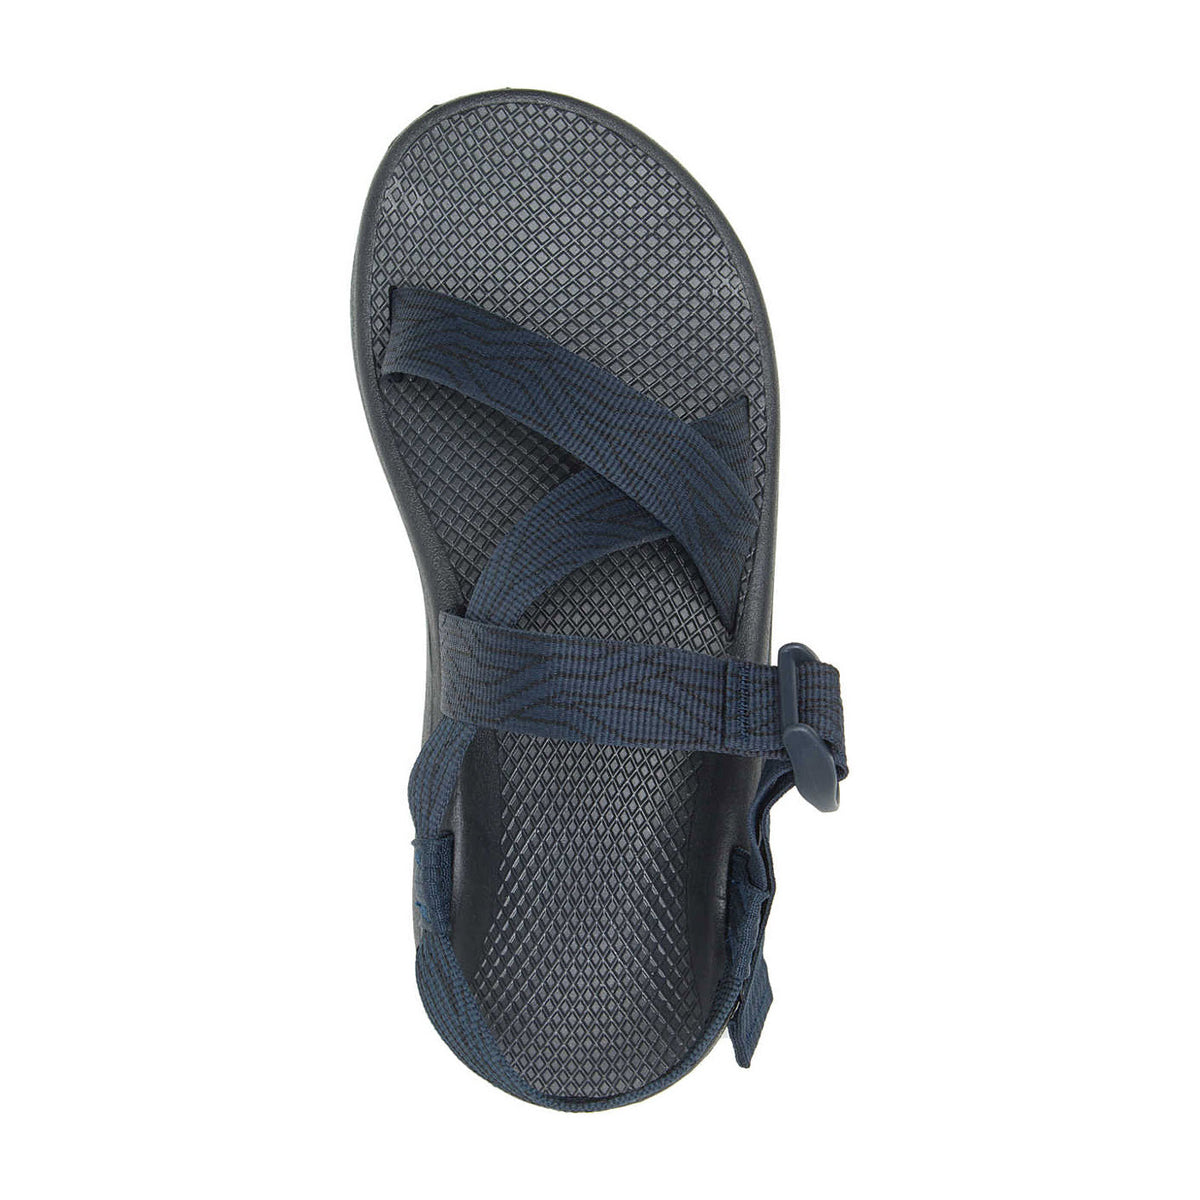 Top view of a single navy blue Chaco Z/Cloud sandal with customizable strap design and a textured insole.